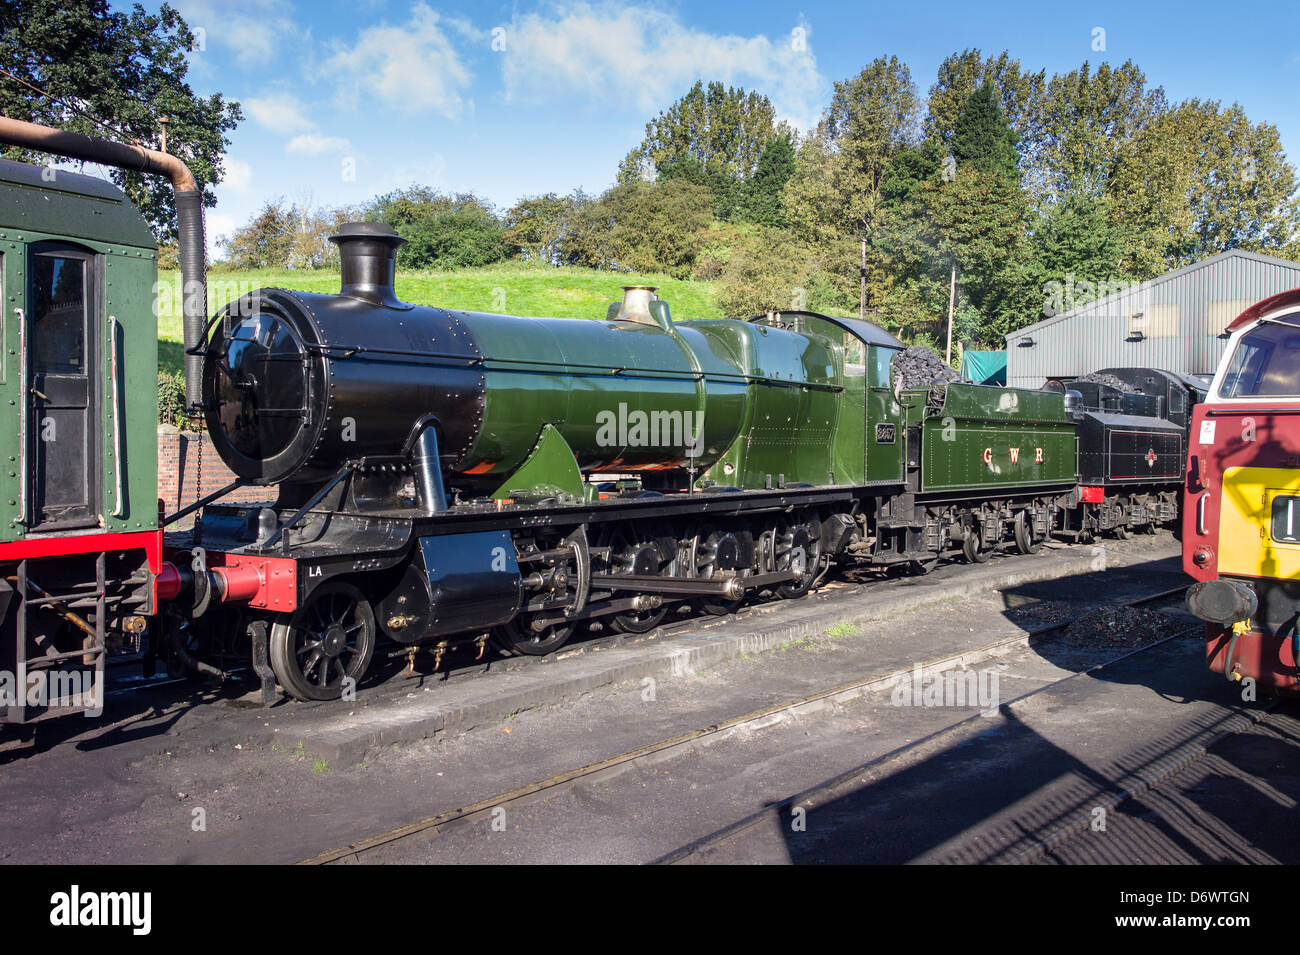 Old (1918) ex-GWR steam railway engine No. 2857 outside the engine shed at Bridgnorth station UK Stock Photo